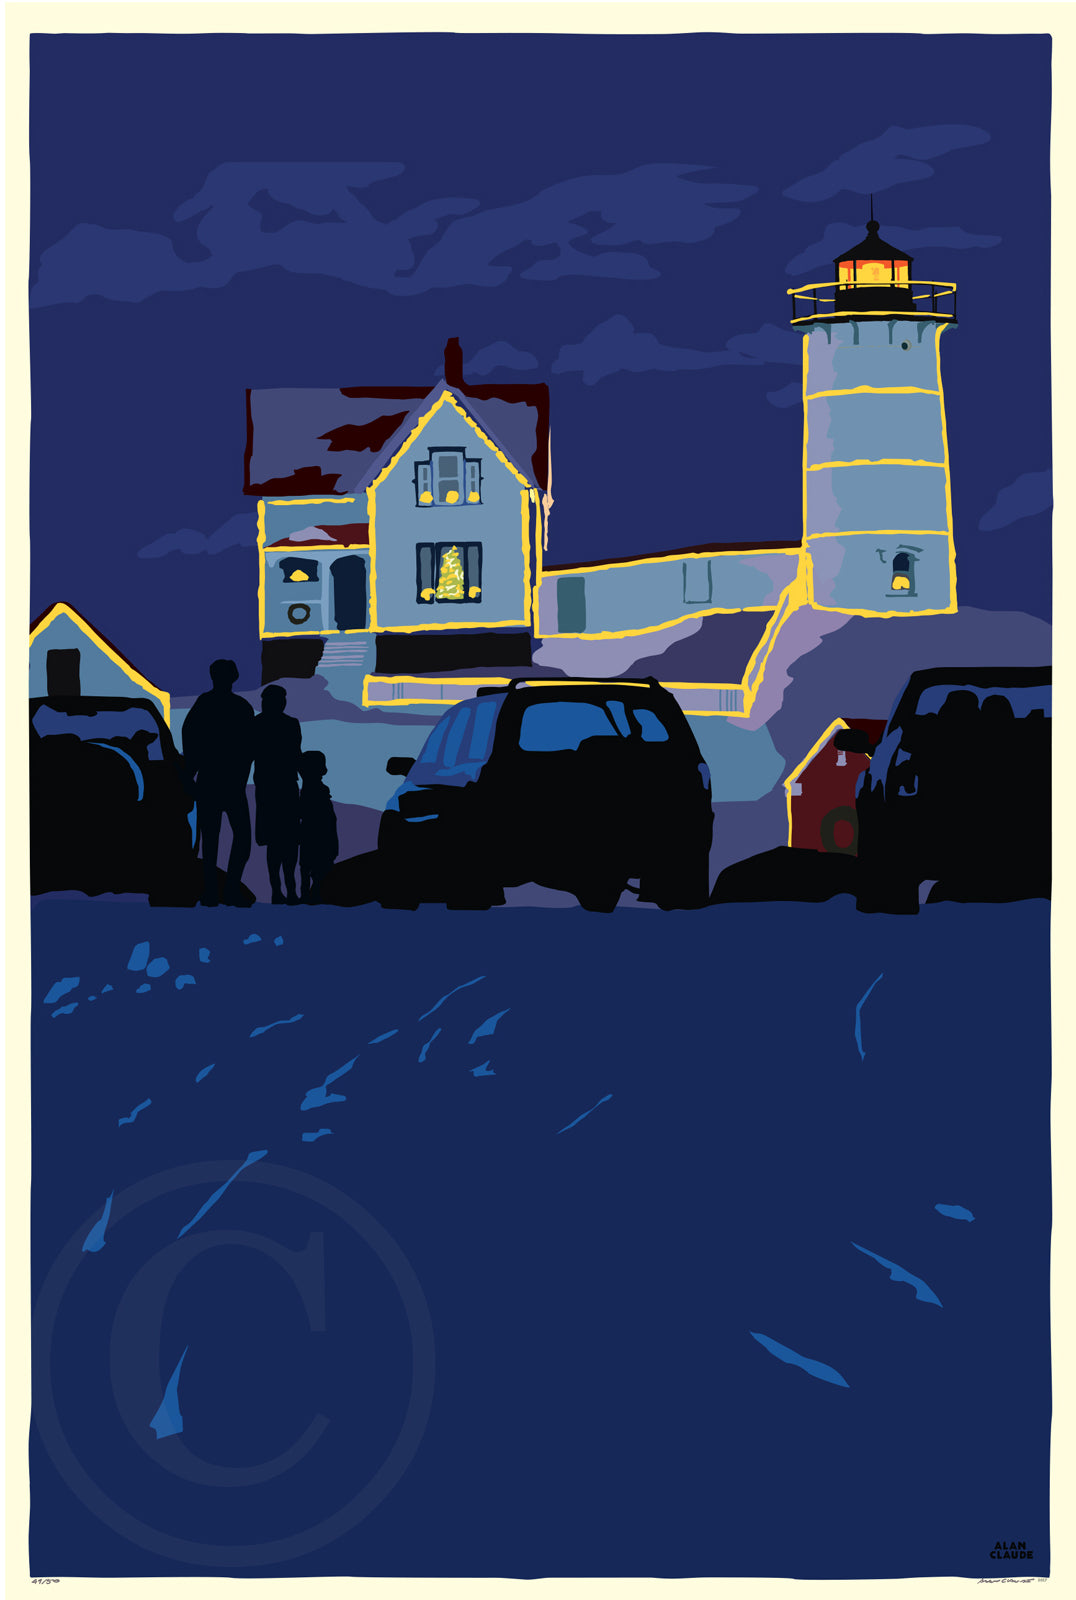 Christmas At The Nubble Art Print 24" x 36" Wall Poster By Alan Claude - Maine